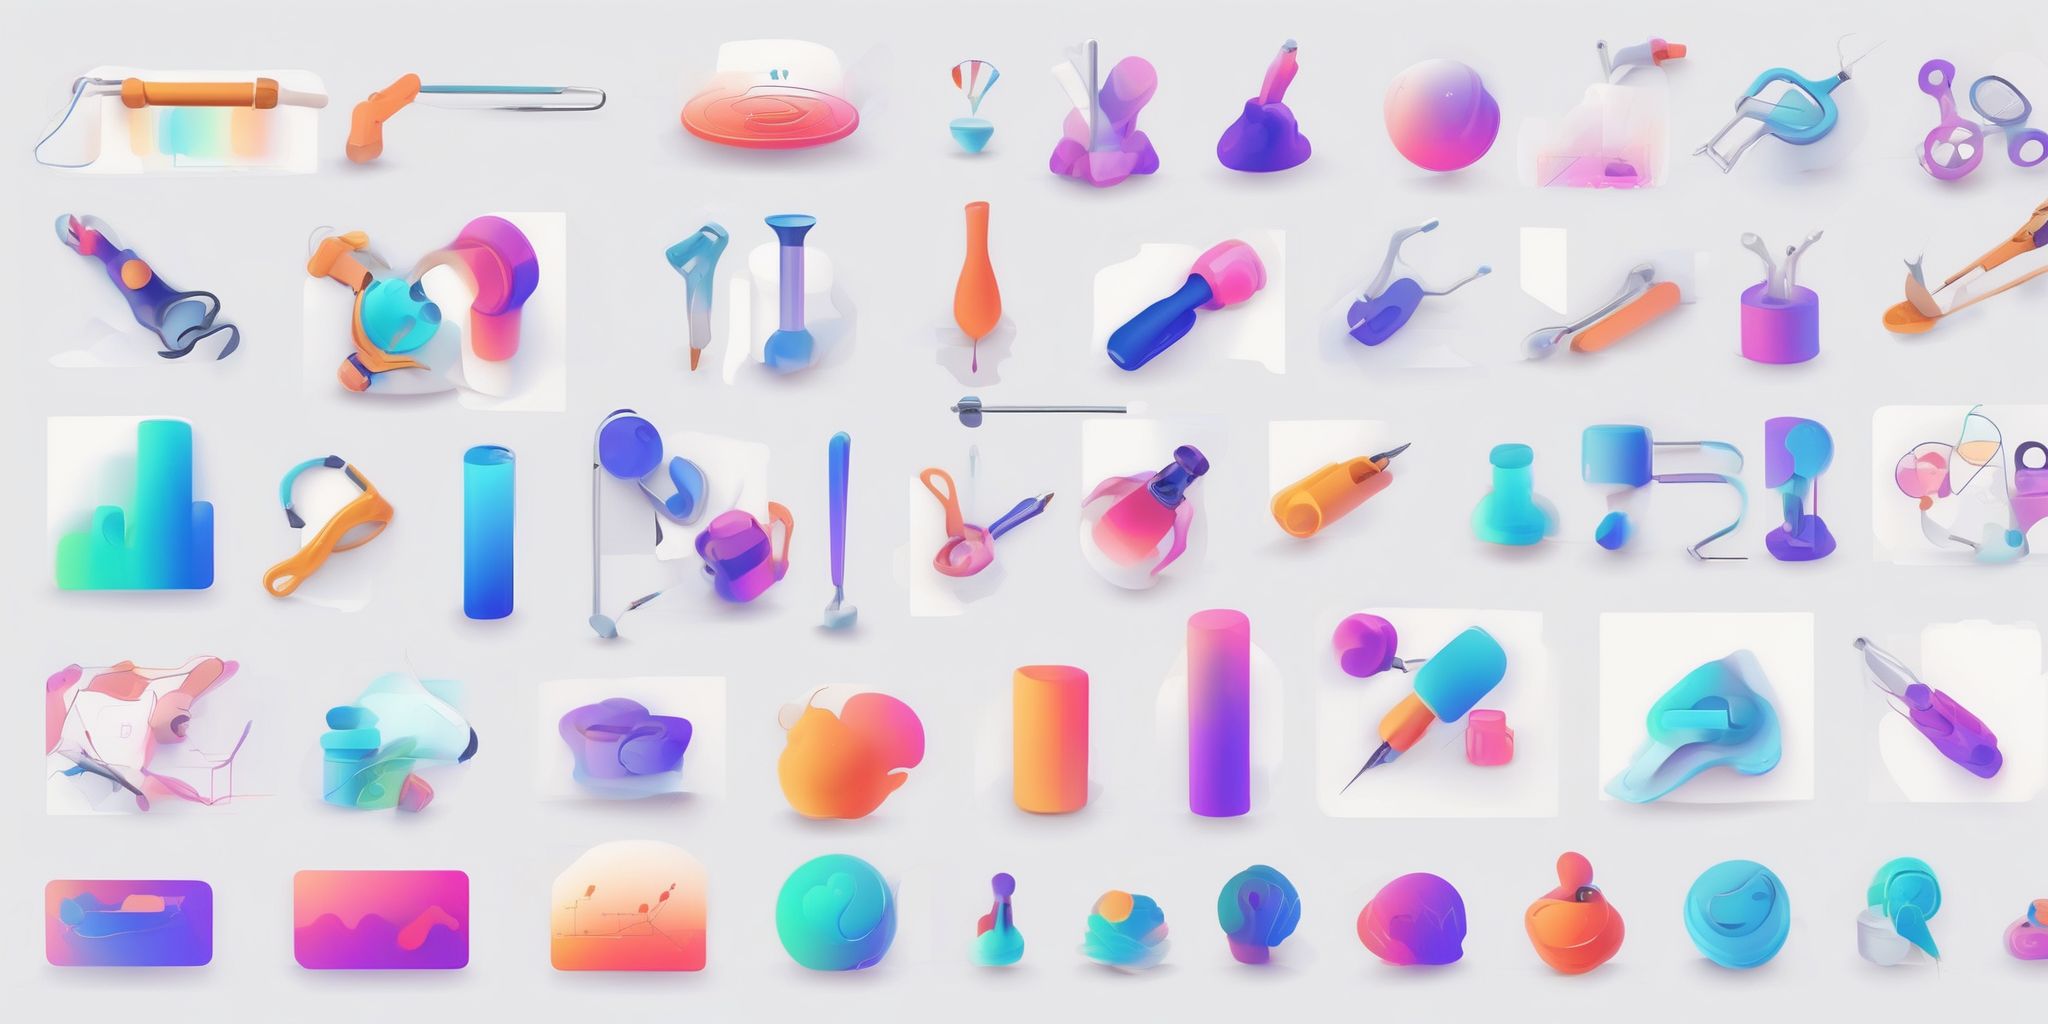 Interactive tools in illustration style with gradients and white background